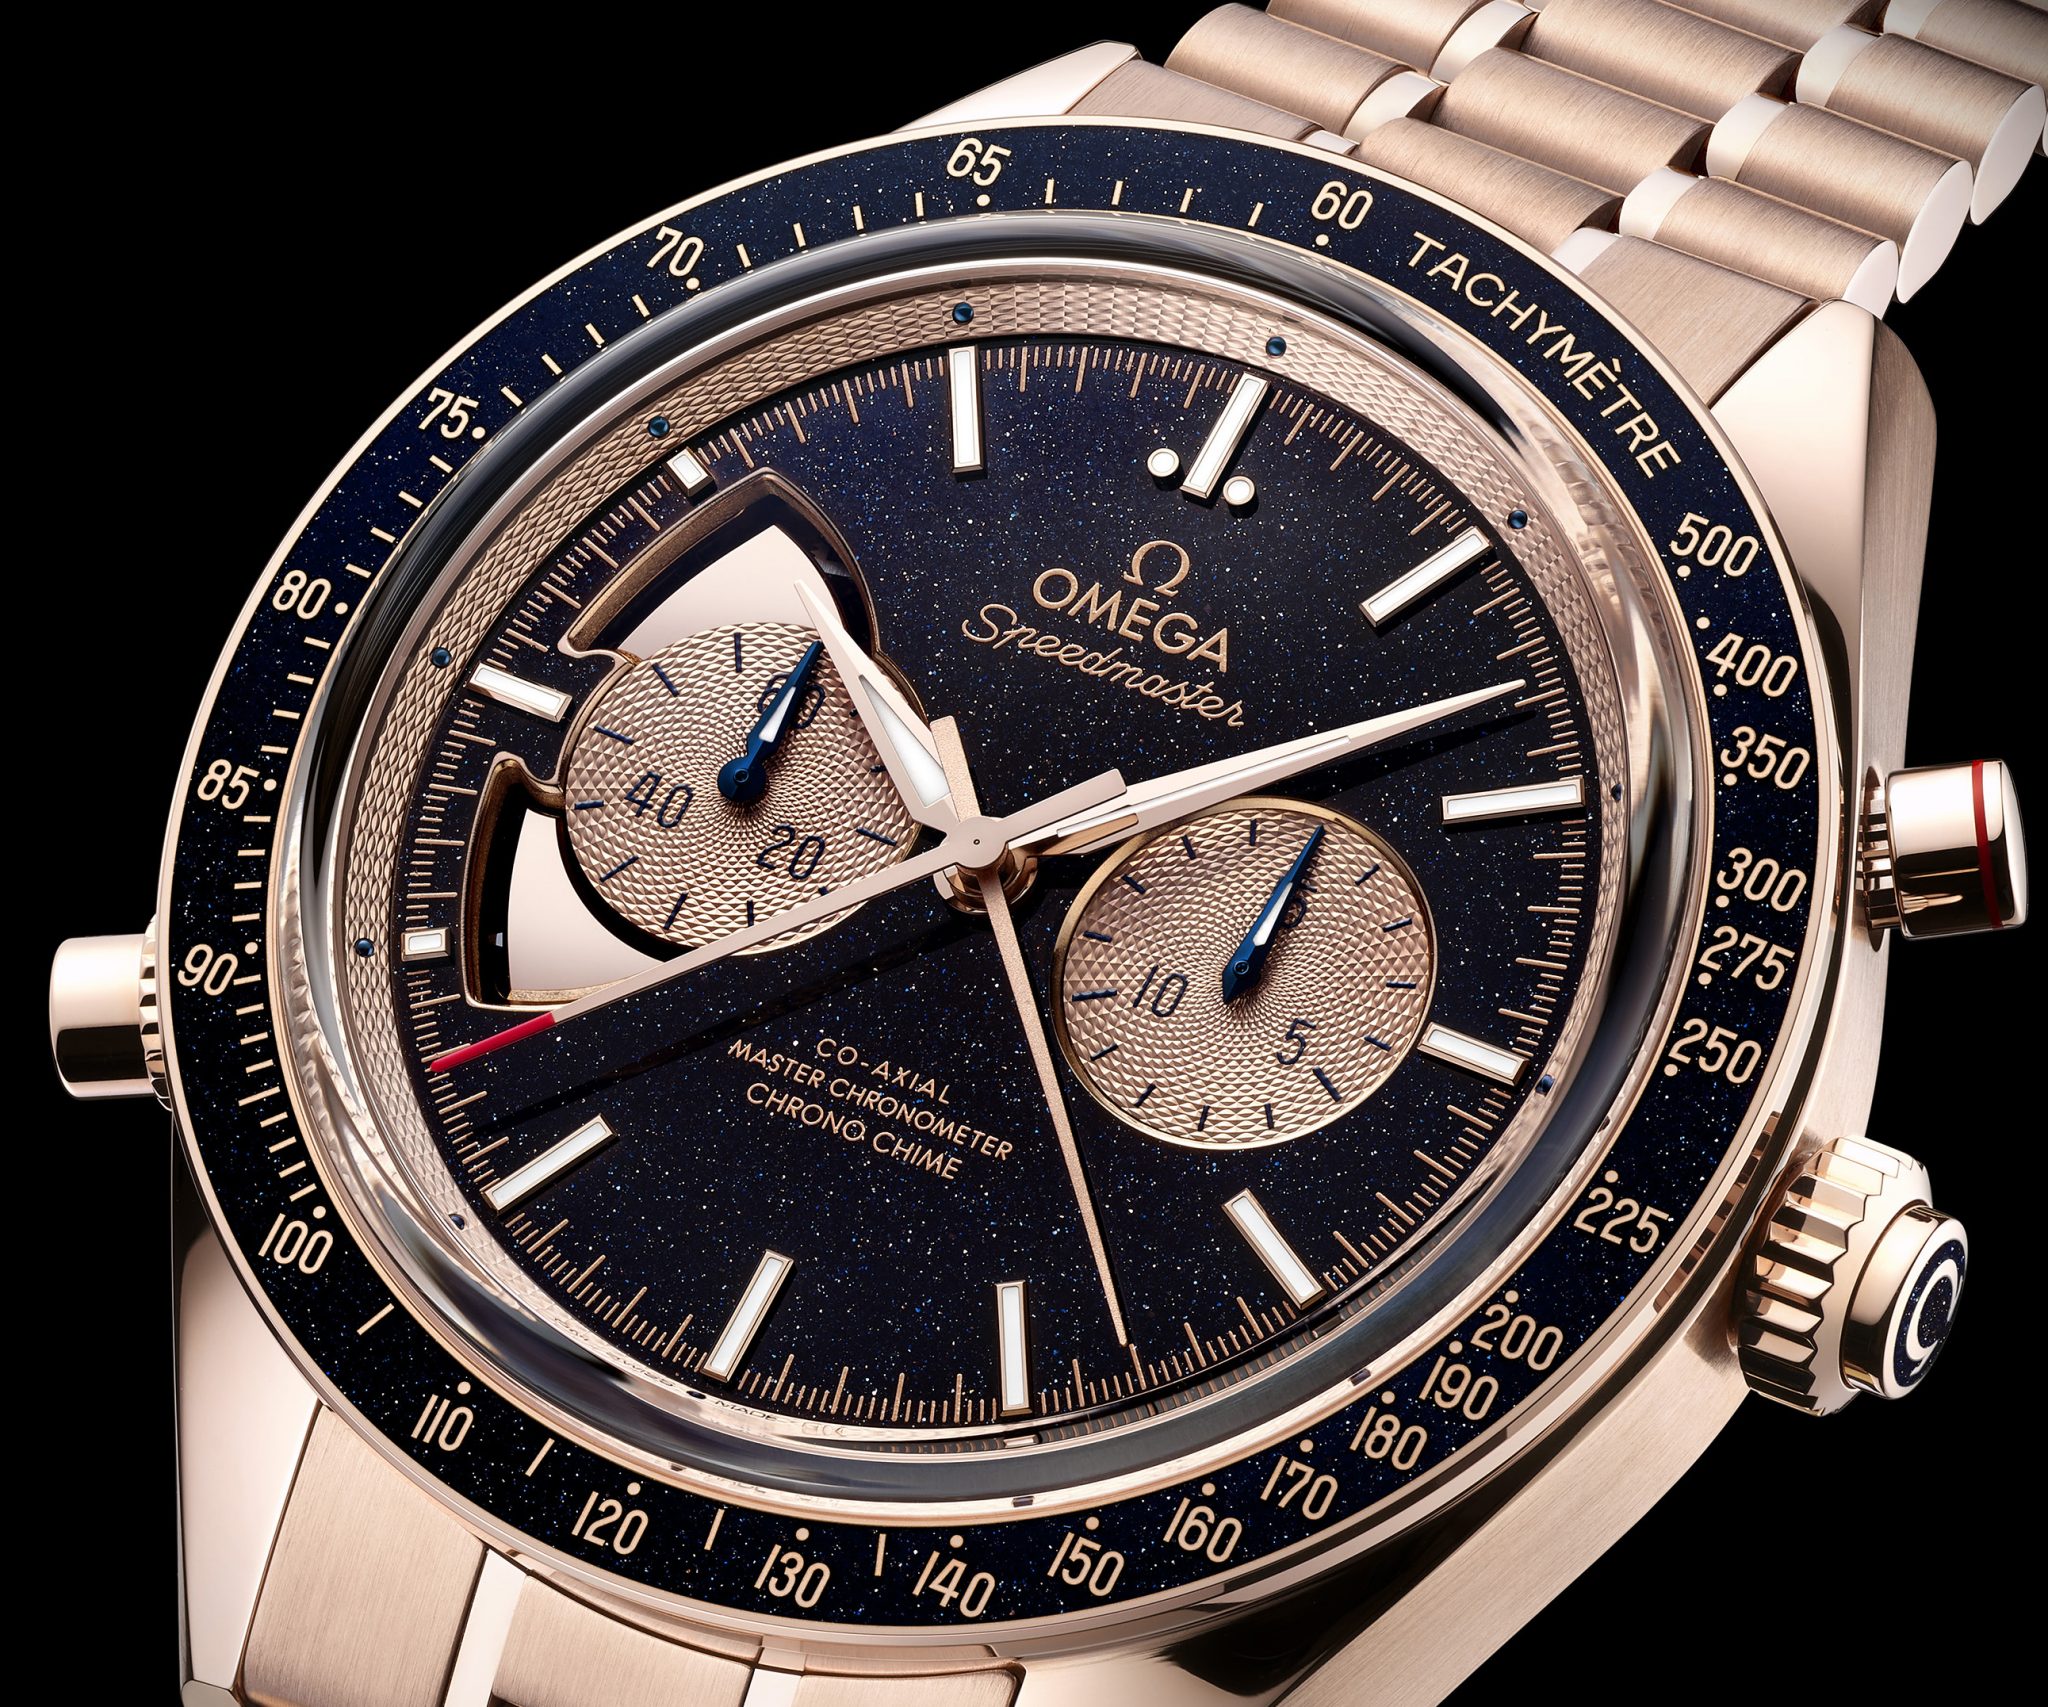 Omega teams up with Blancpain to create golden chiming movement